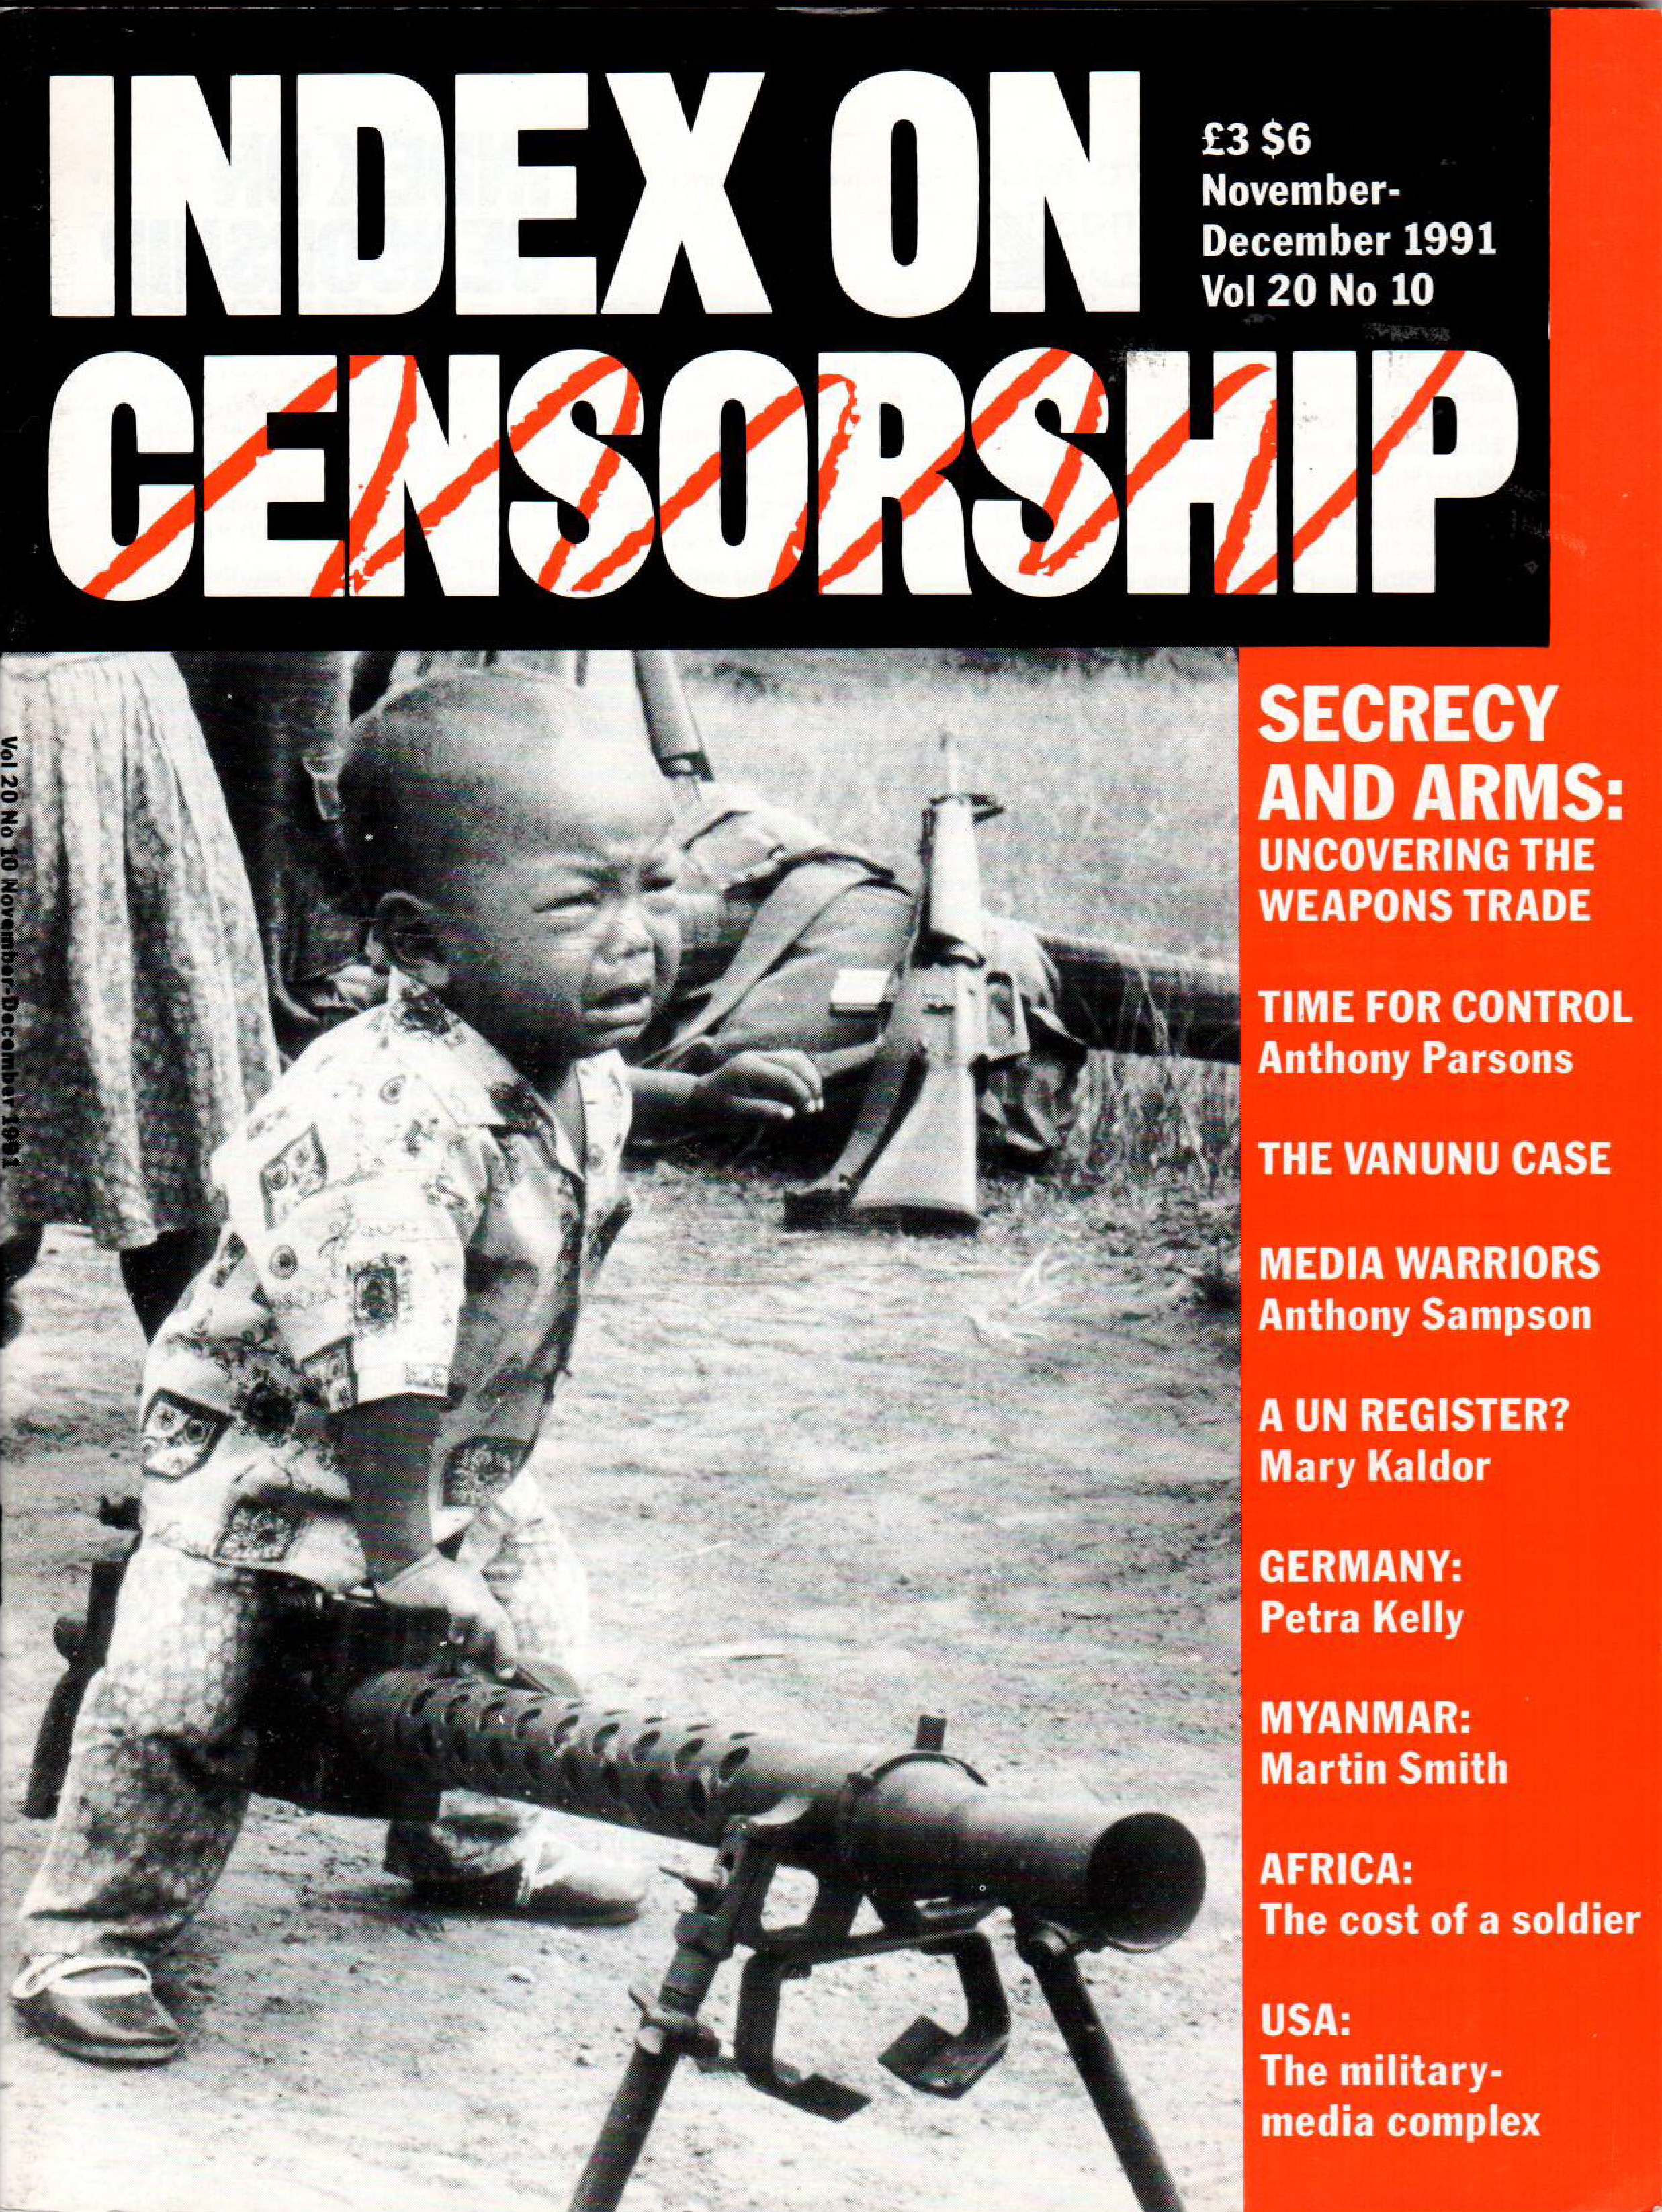 Secrecy and arms, the November 1991 issue of Index on Censorship magazine.